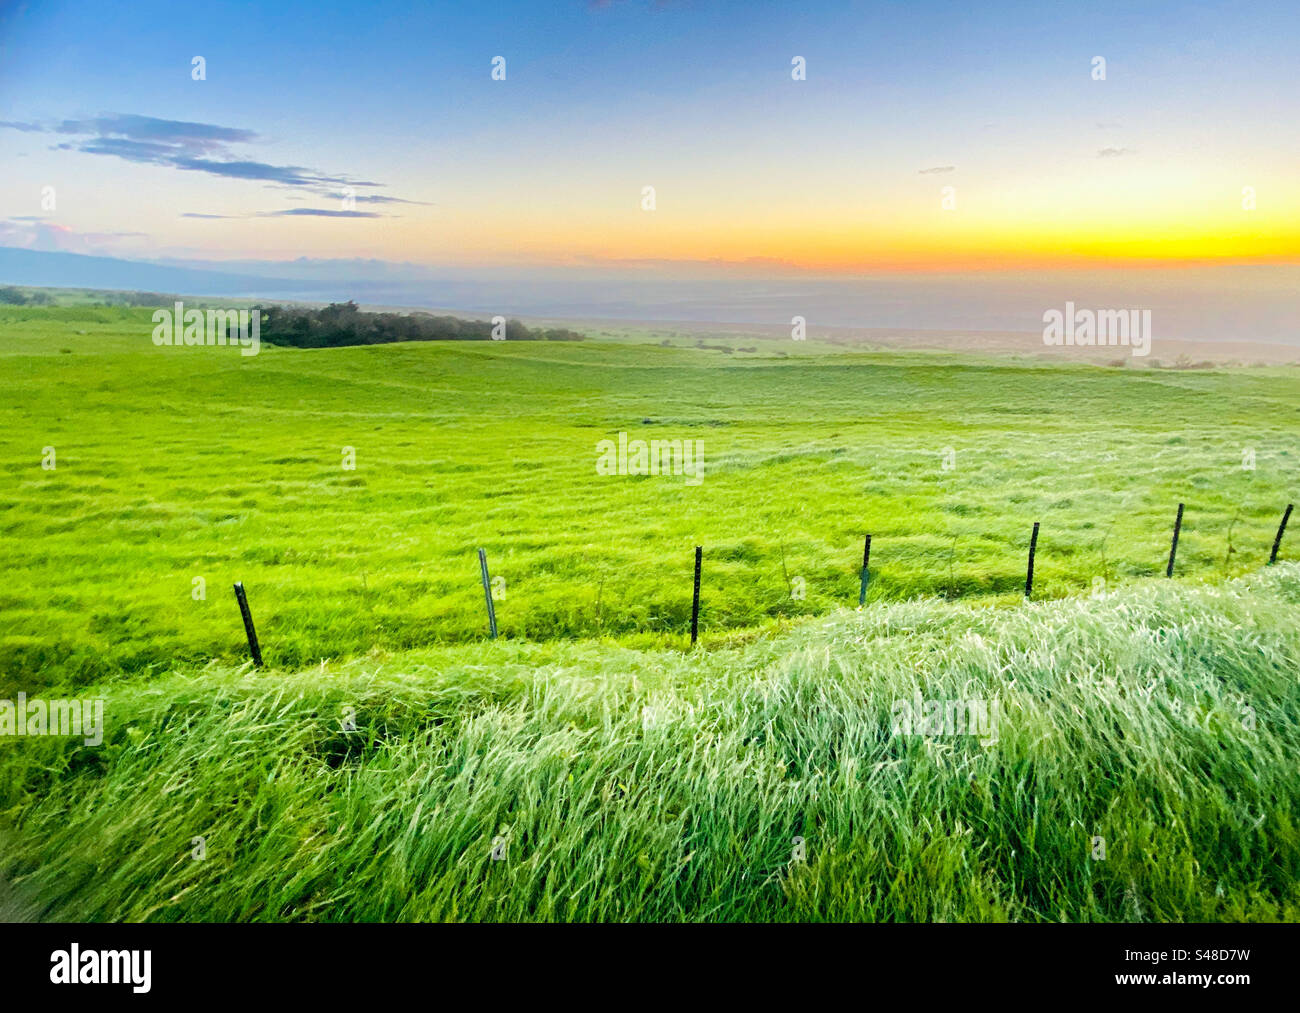 Wind blown grassy fields on the leeward side of the big island of Hawaii at sunset Stock Photo